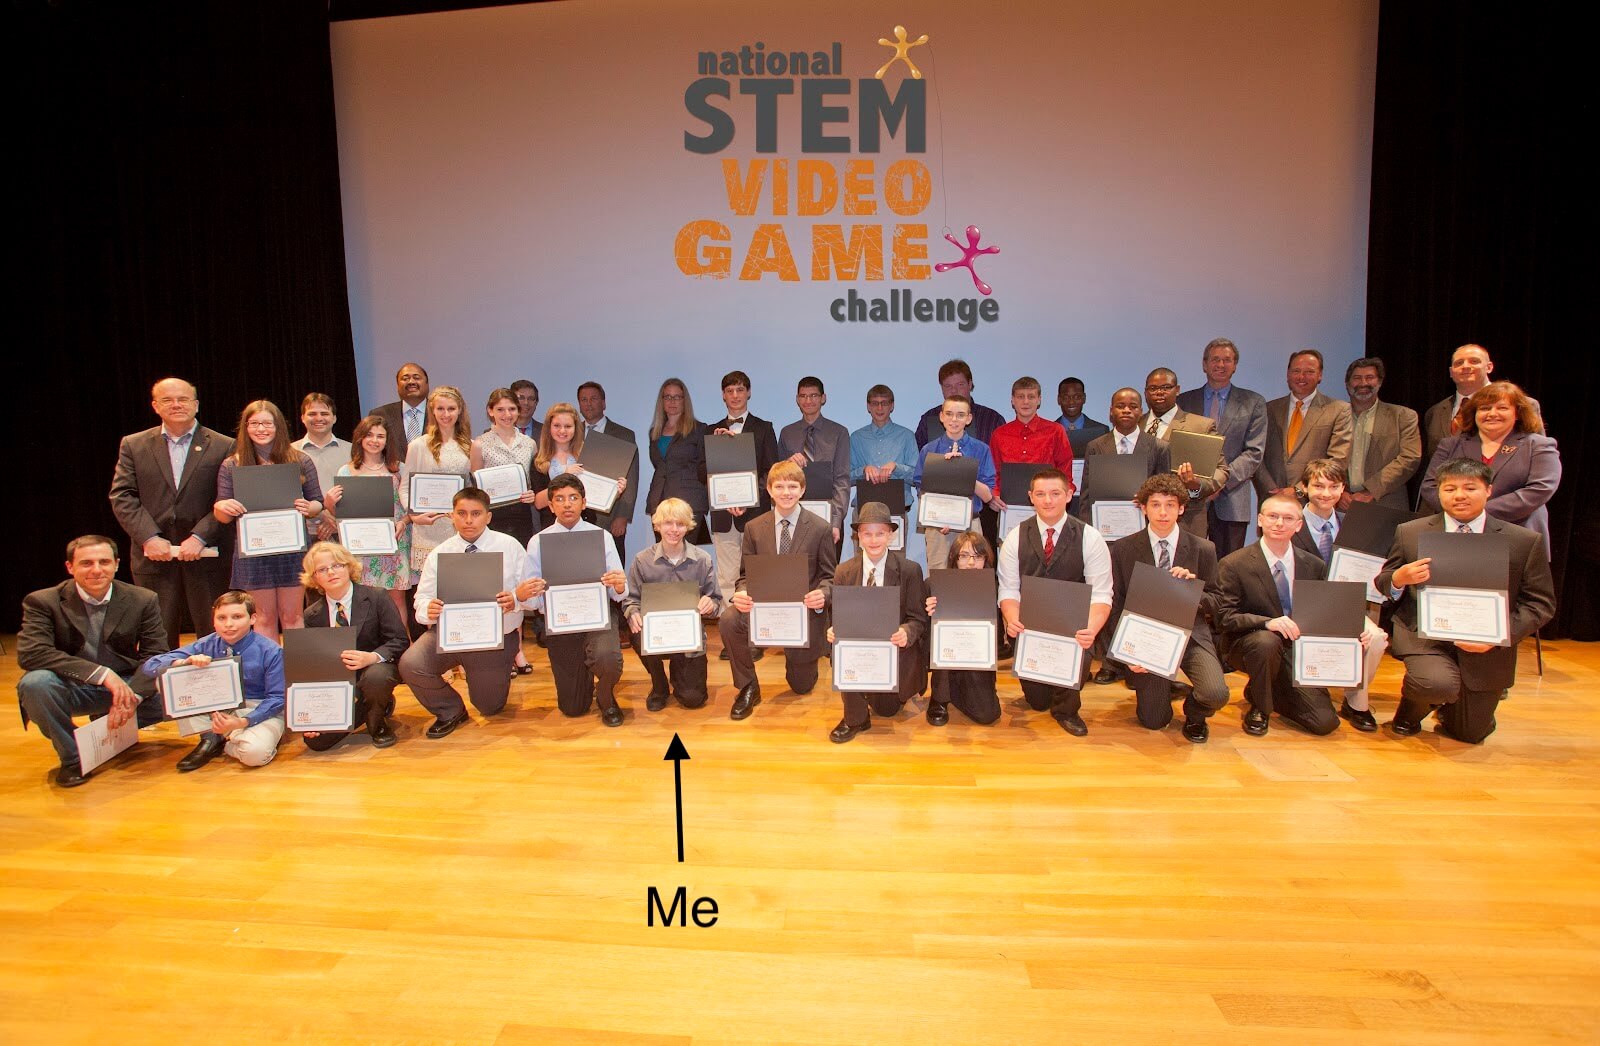 Winners of the 2012 National STEM Video Game Challenge